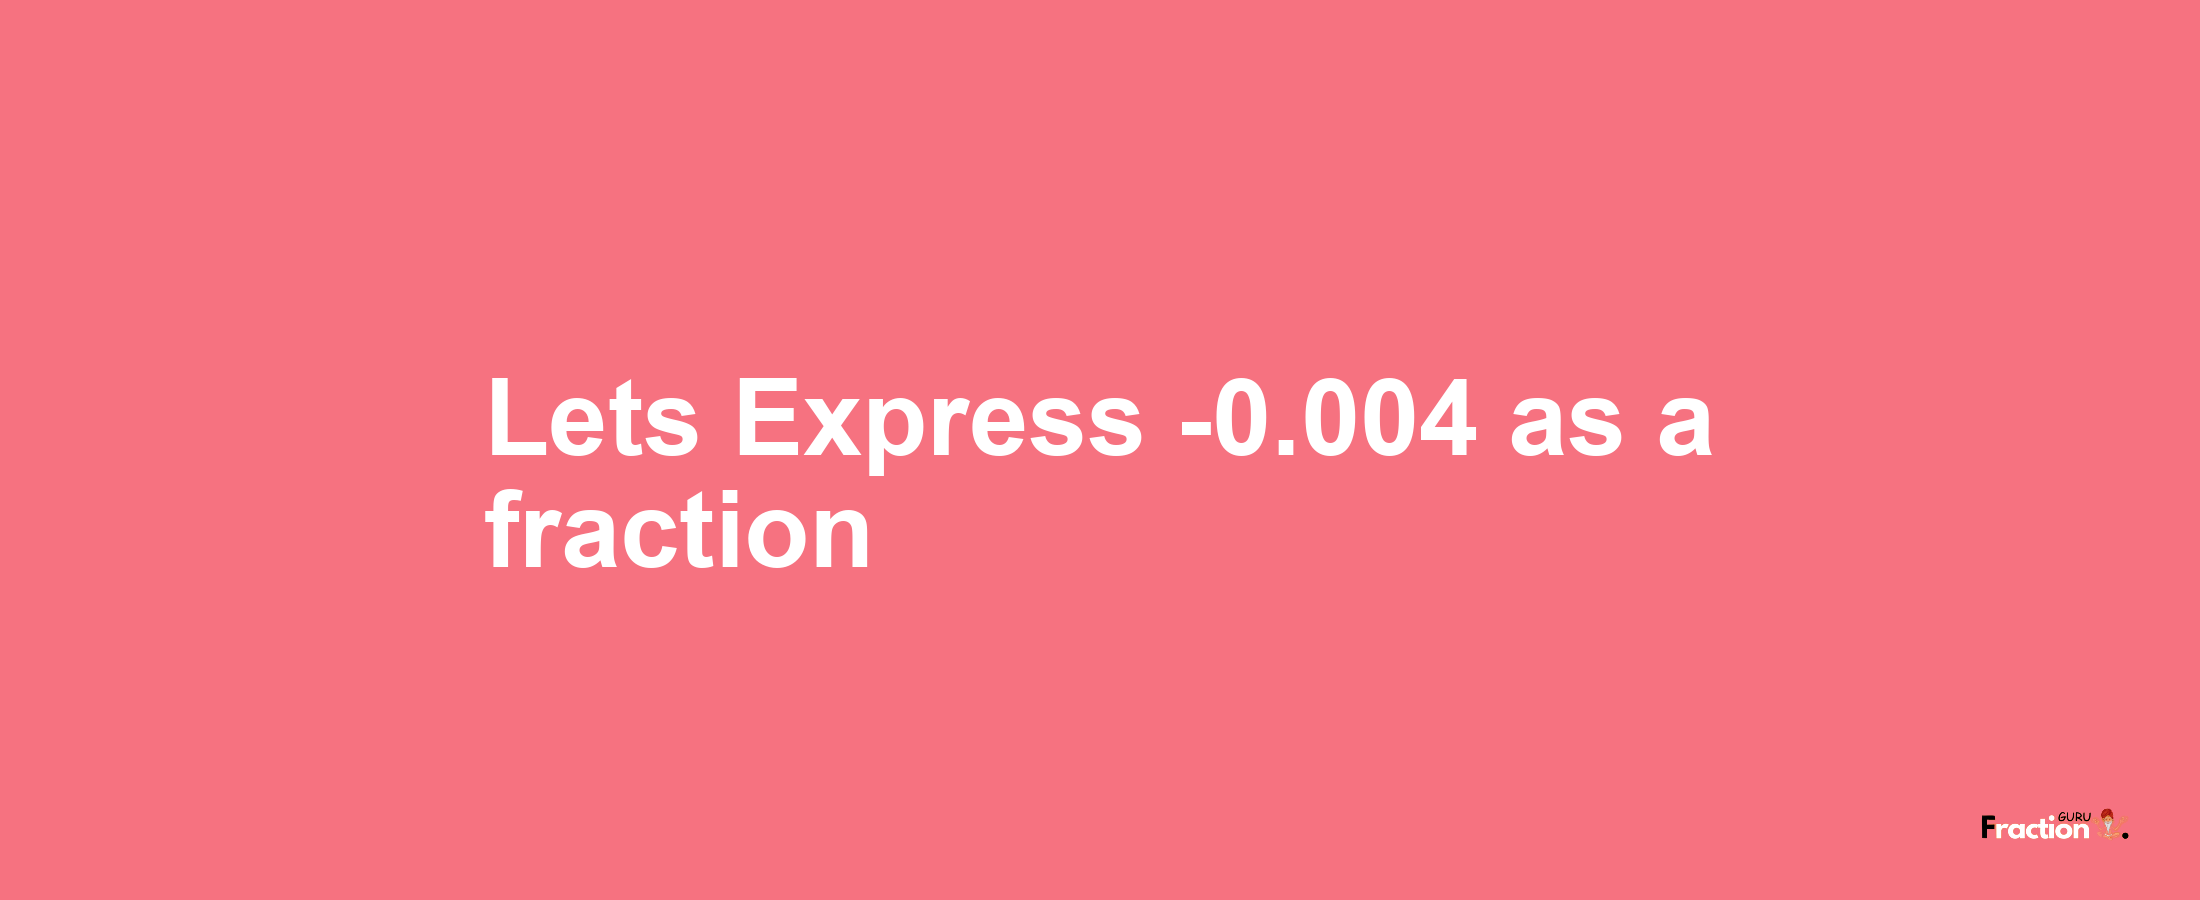 Lets Express -0.004 as afraction